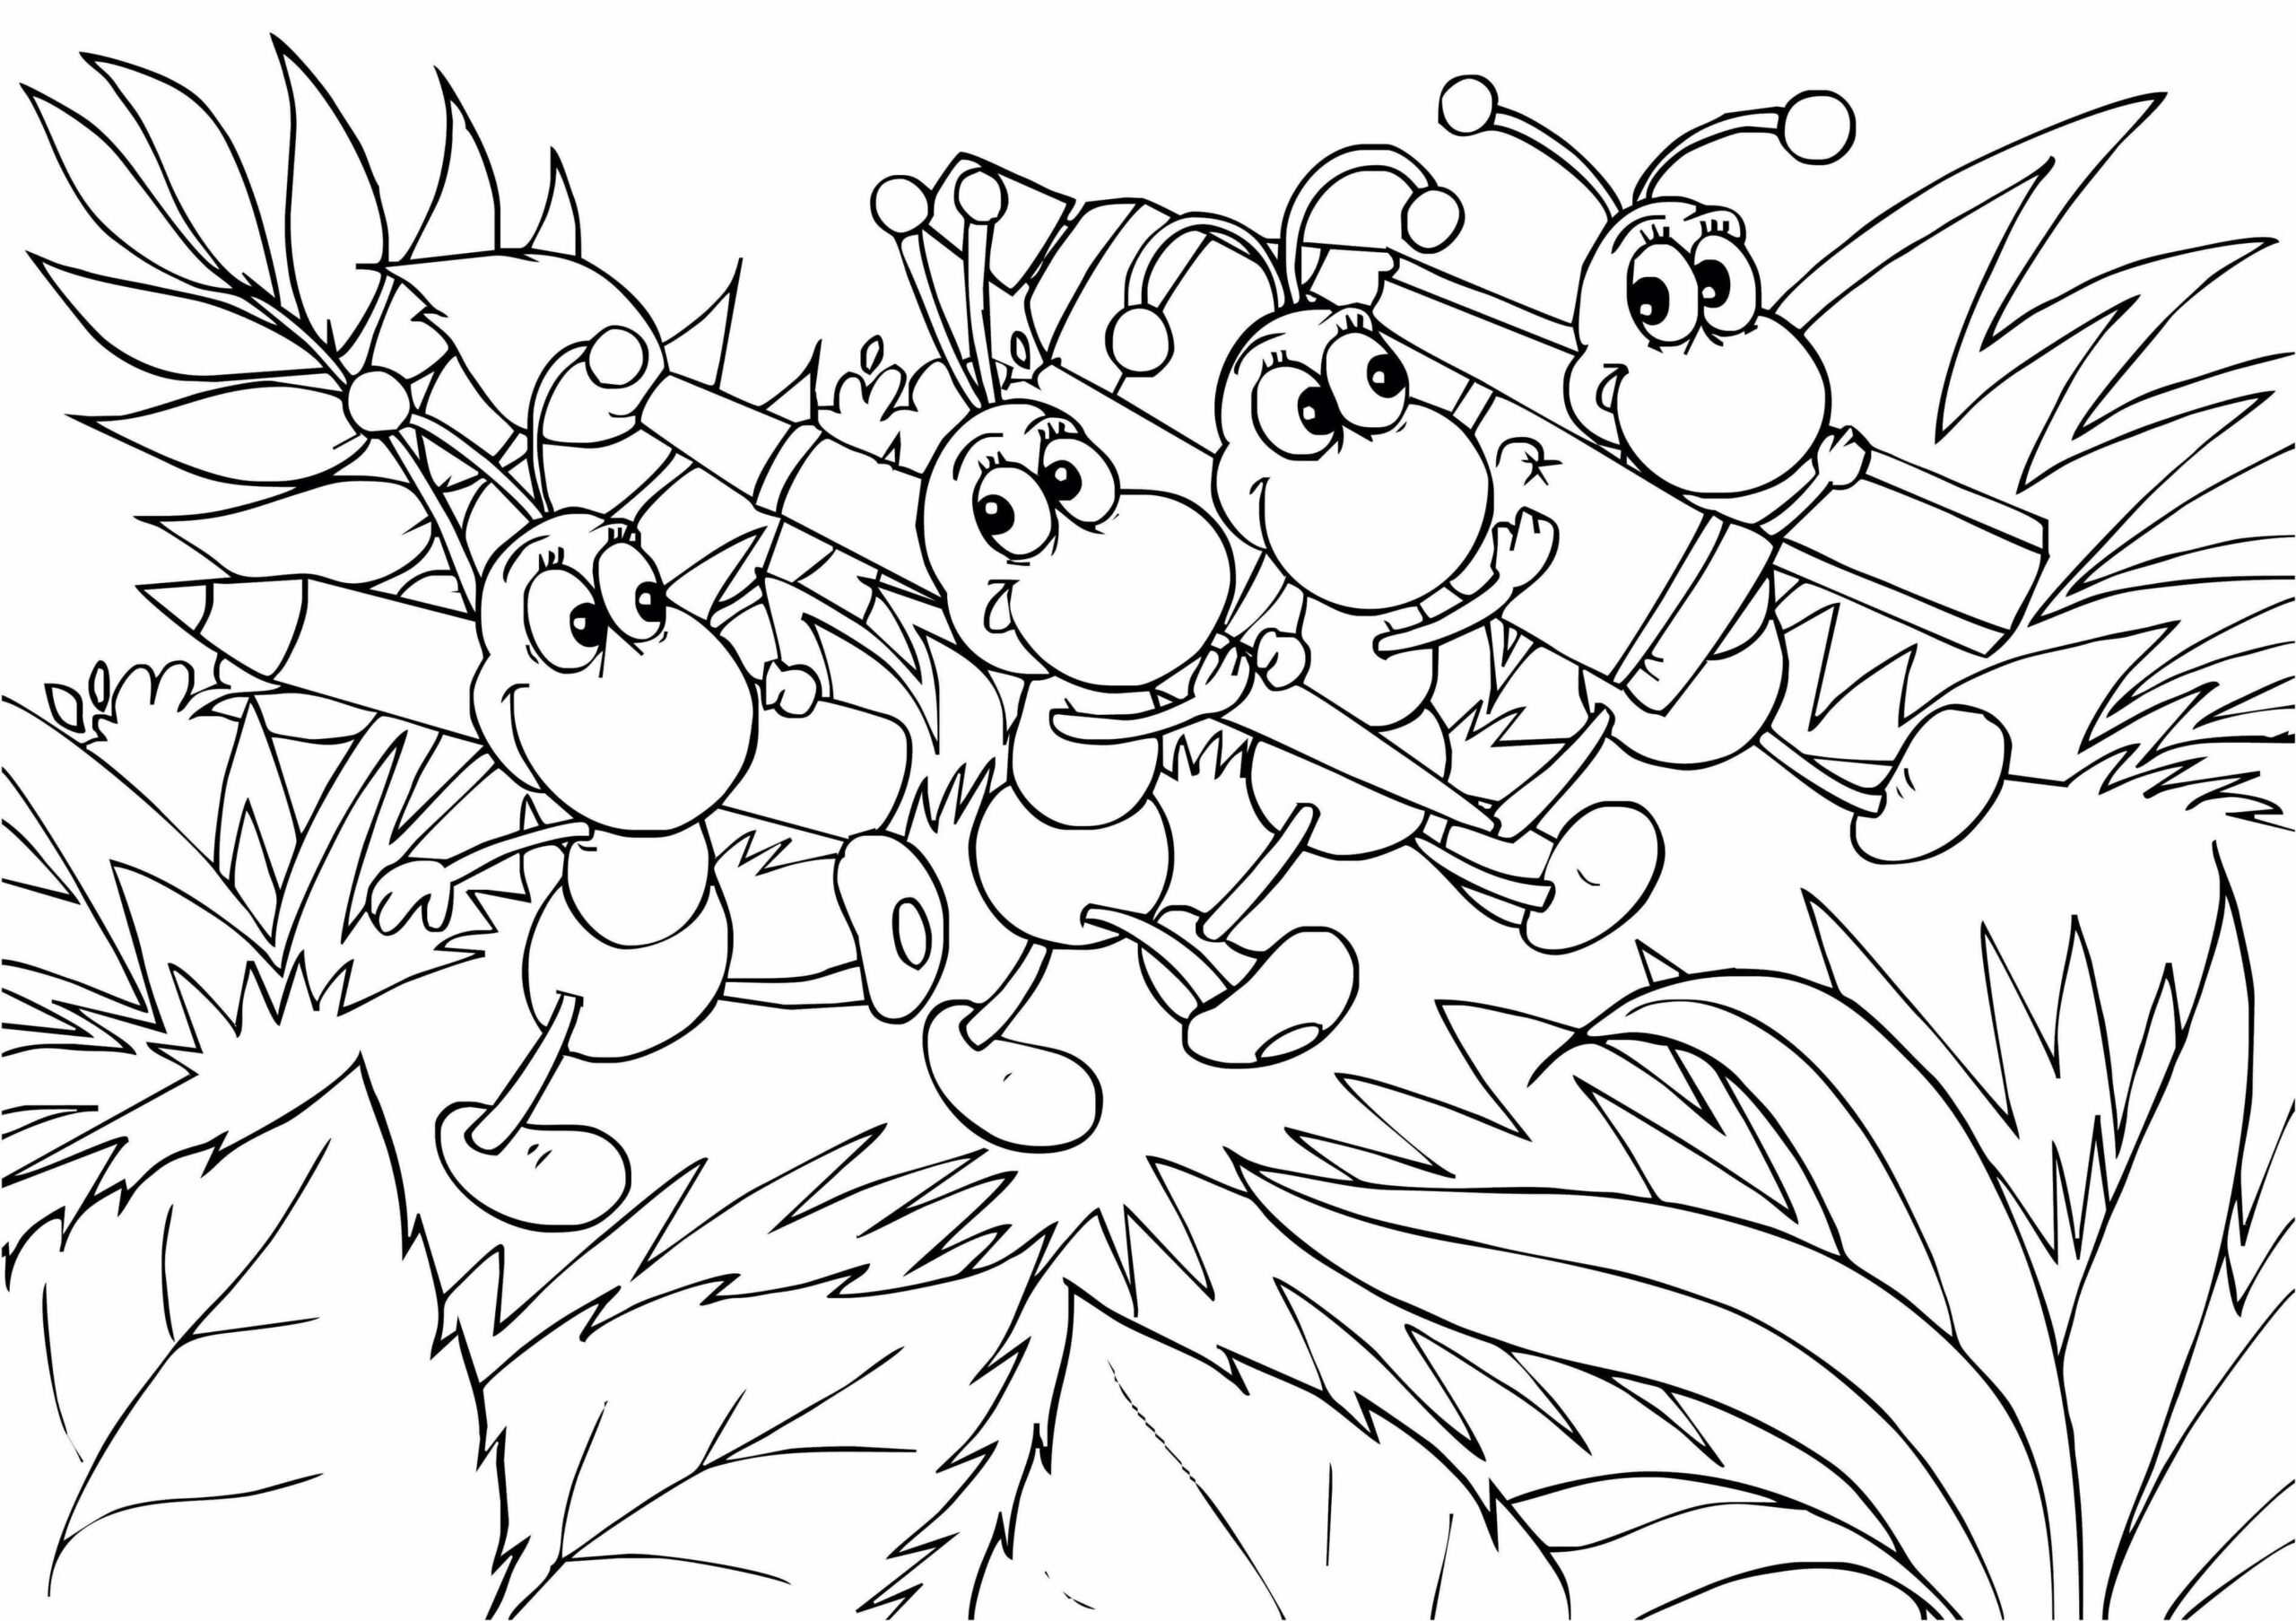 Ants Go Marching coloring page - Download, Print or Color Online for Free